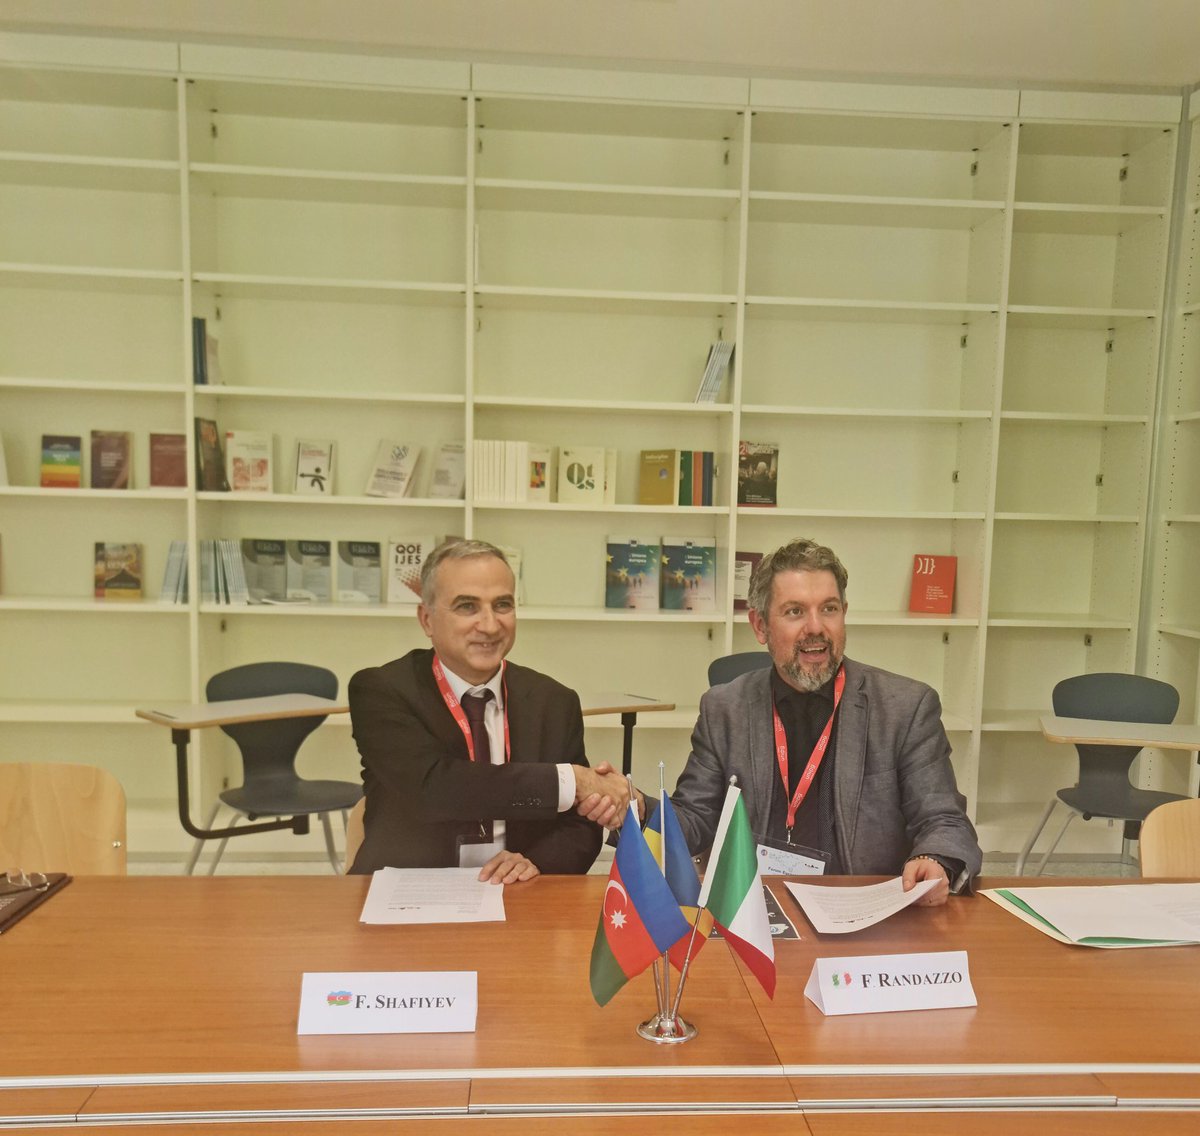 A Memorandum of Understanding was signed between the AIR Center and the ICEuSR International Center for Eurasian Studies and Research University of Perugia. The document envisages expanding cooperation in the field of  academic exchanges and holding joint events.